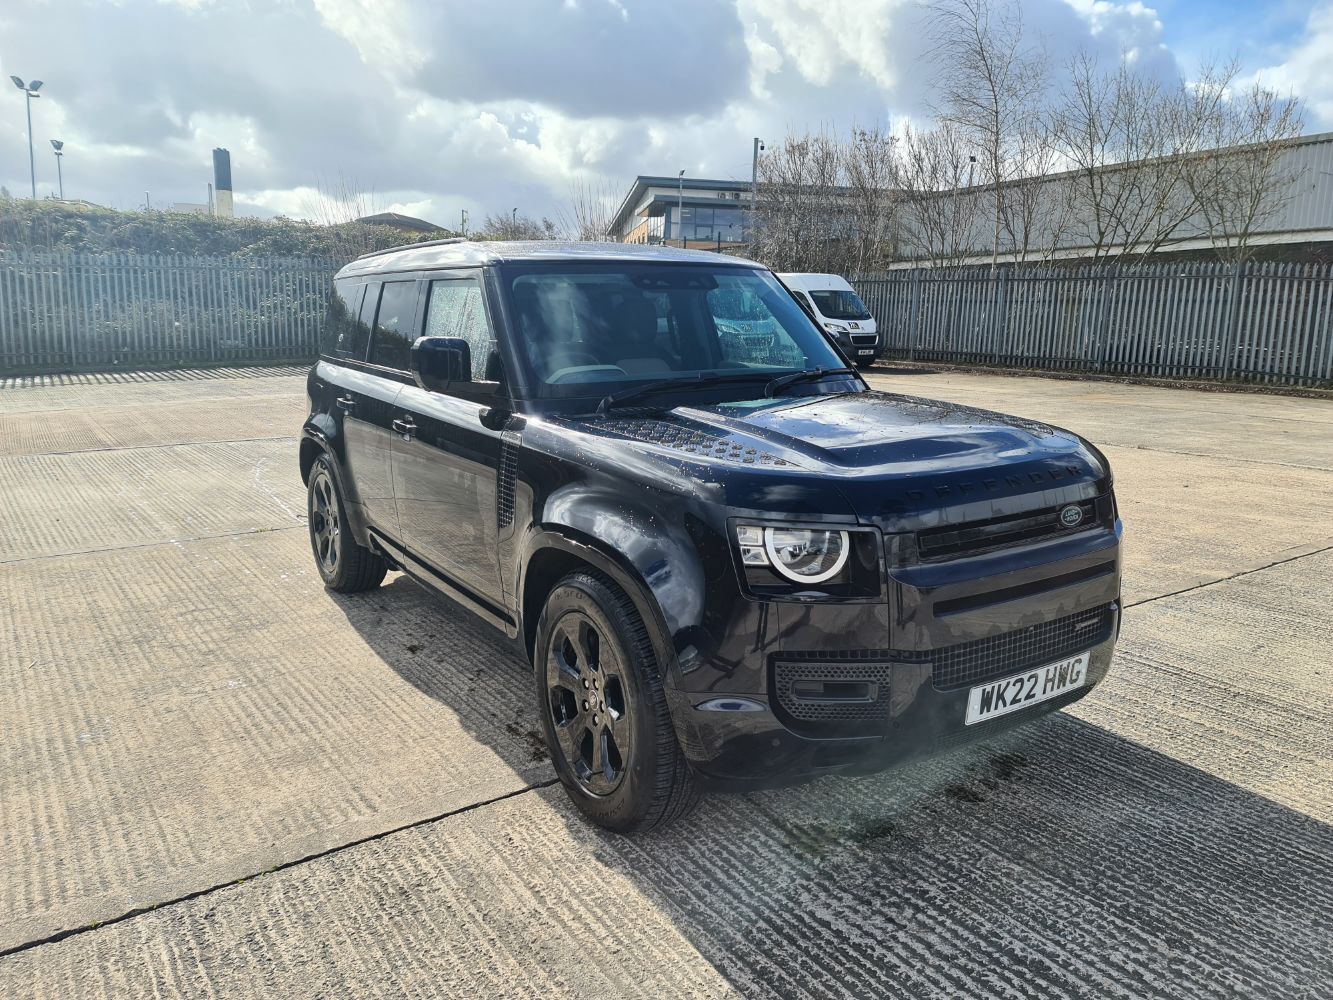 2022 Defender 110 P400e, '21 Ford Transit Custom Motion R, '21 Nissan Navara, Panel Vans, Woodworking Machinery and Container Showhome